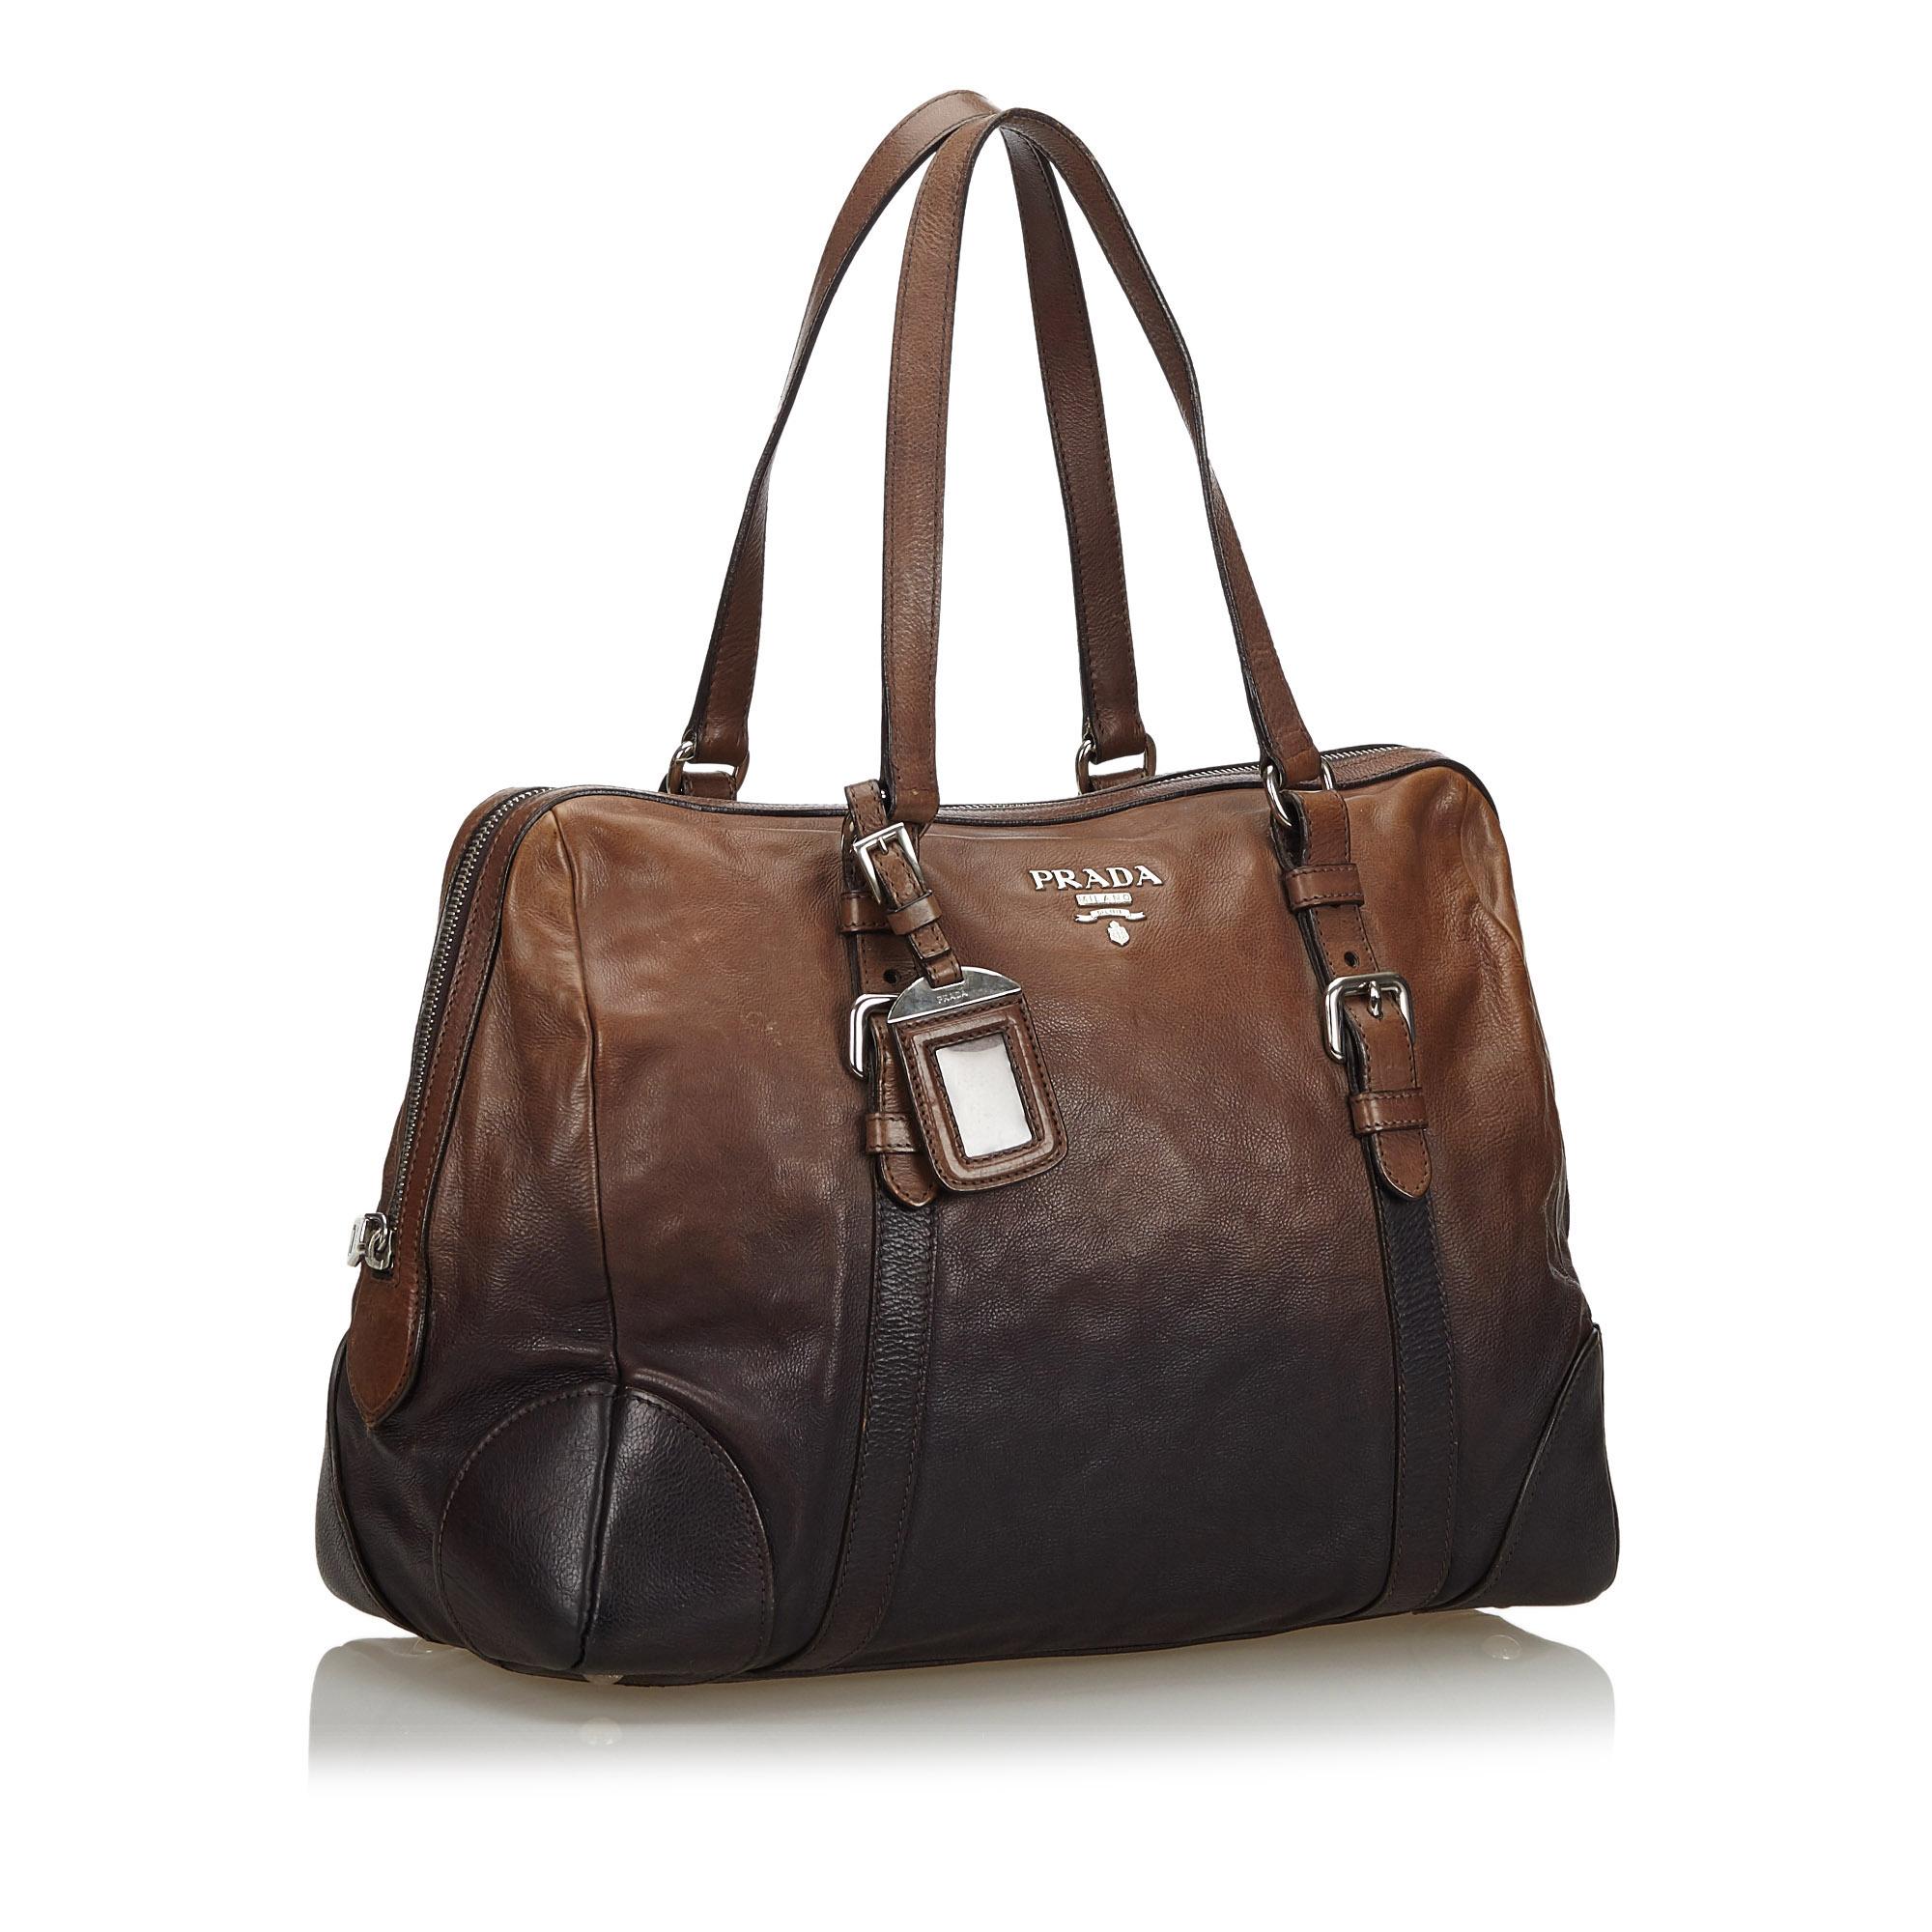 This weekender features a leather body, flat leather straps, a top zip closure, and an interior zip pocket. It carries as B+ condition rating.

Inclusions: 
This item does not come with inclusions.

Dimensions:
Length: 27.00 cm
Width: 44.00